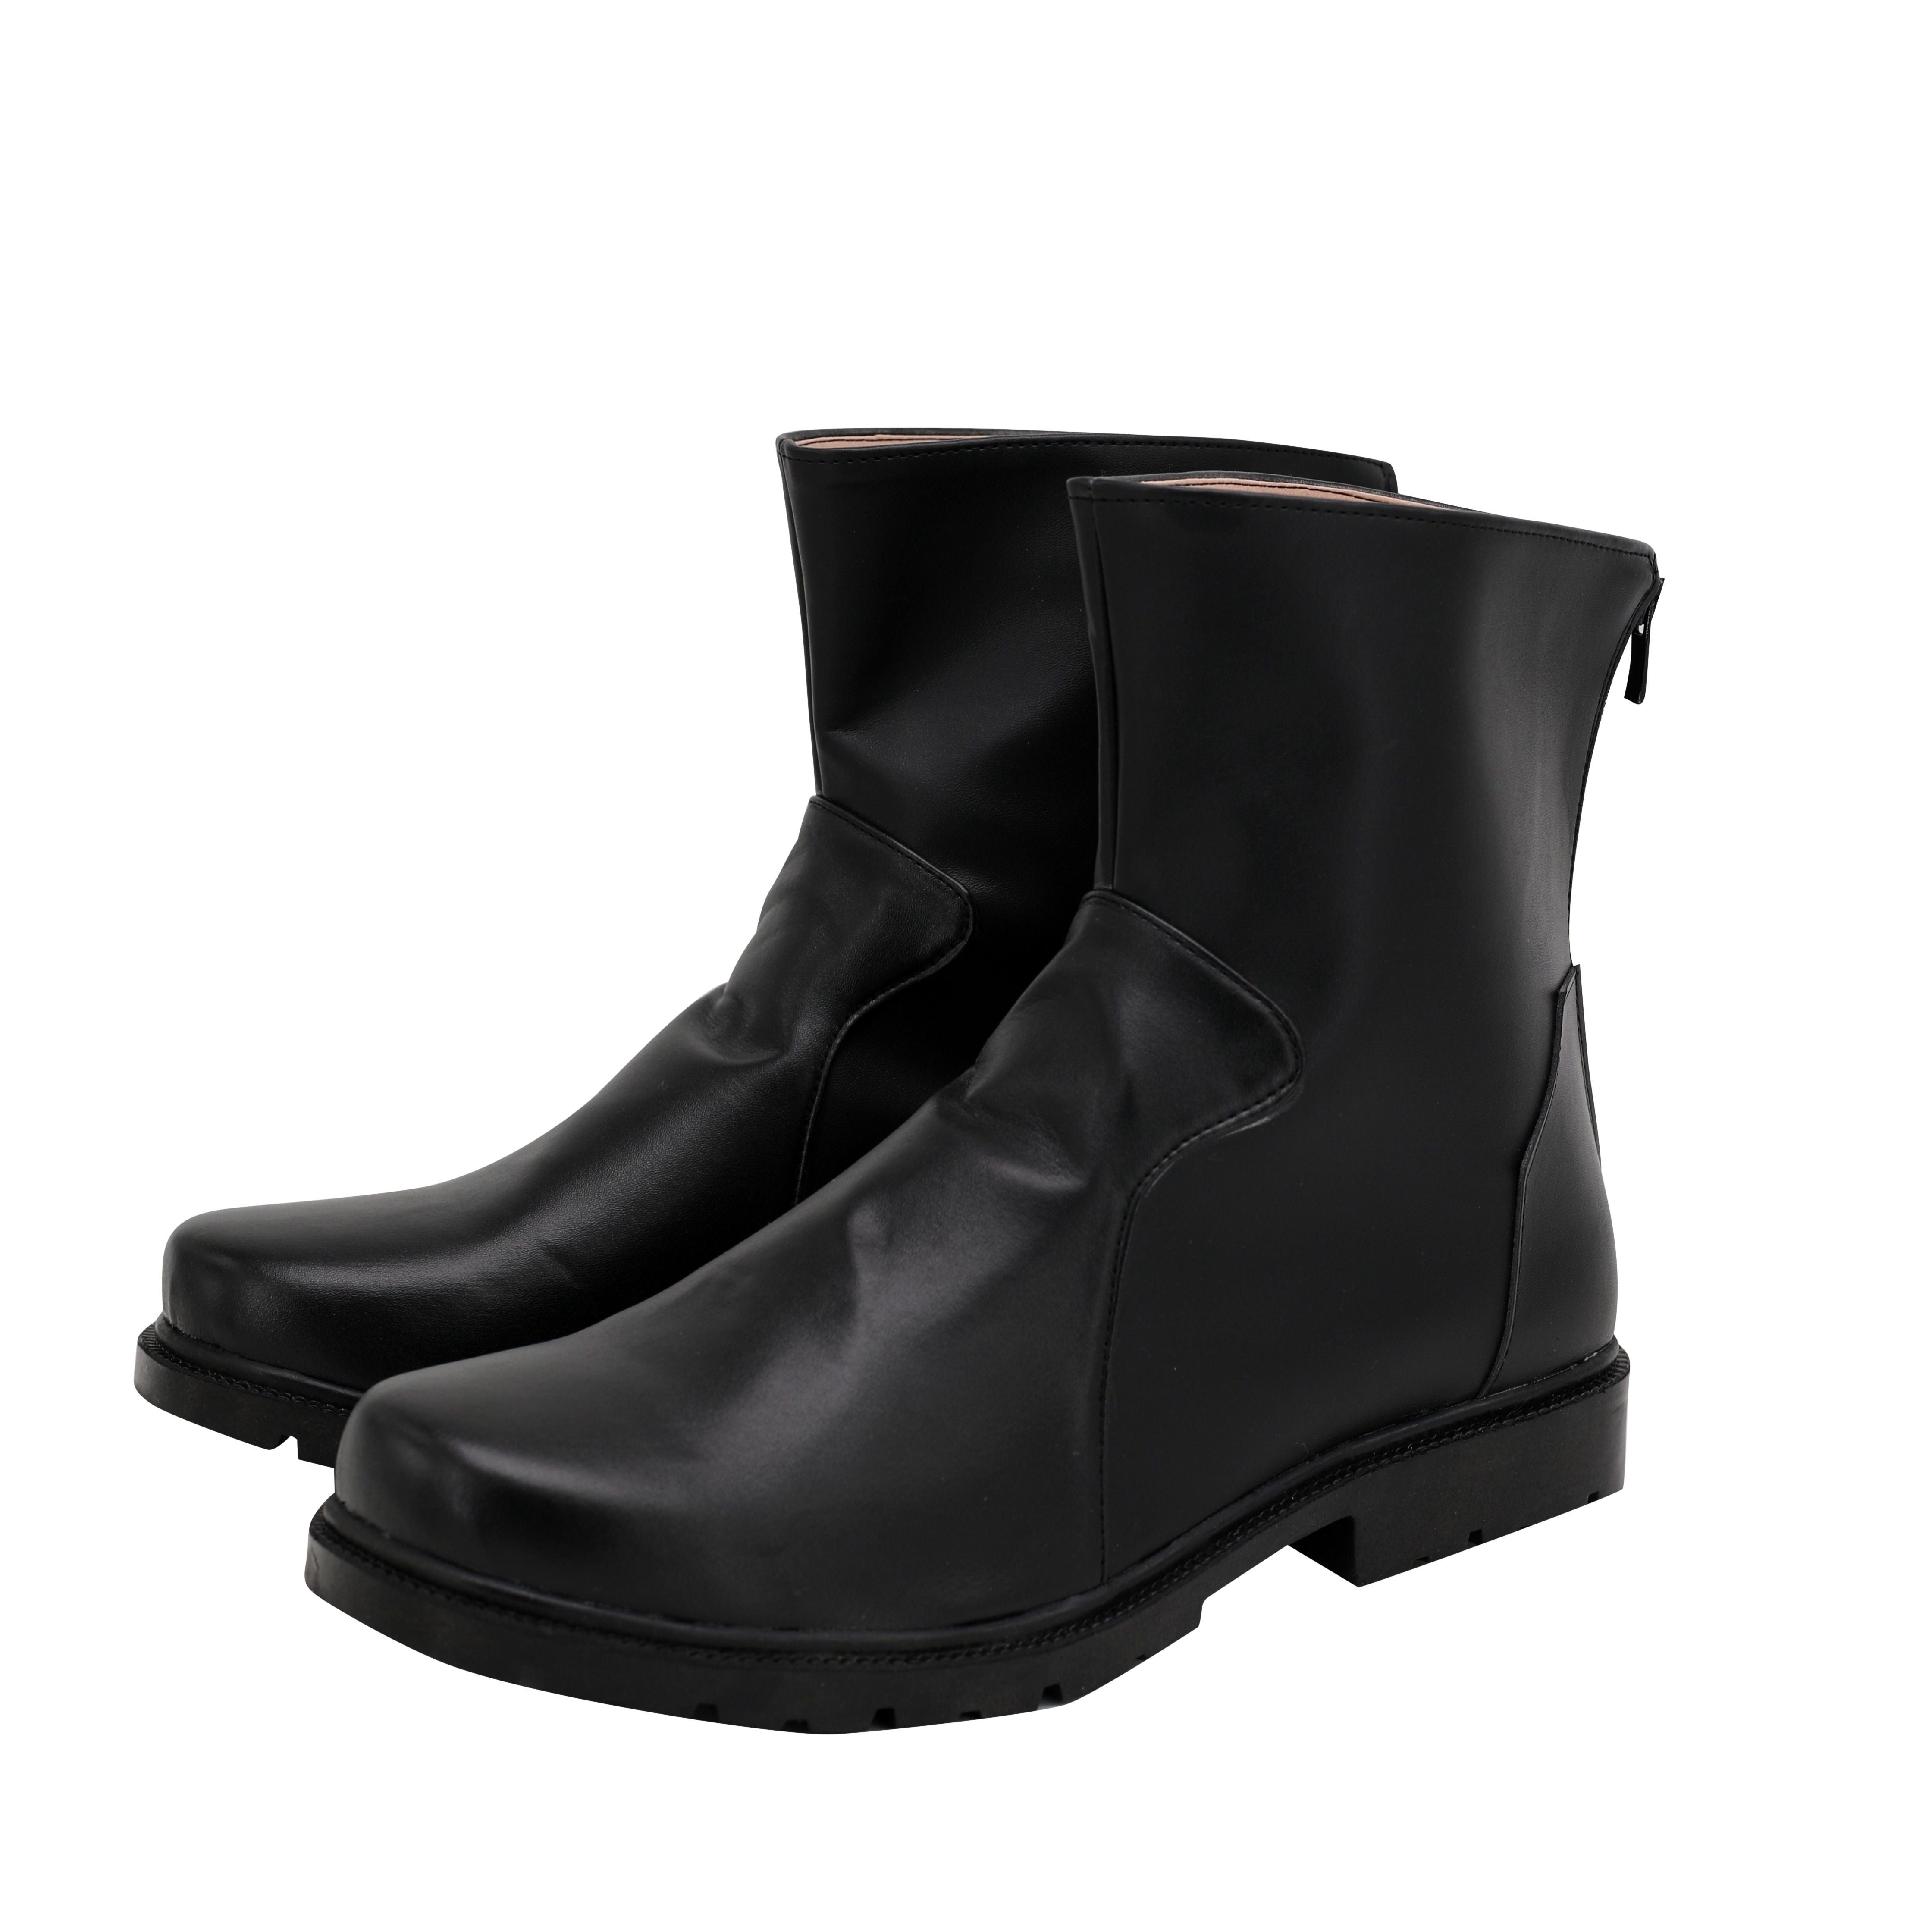 Final Fantasy VII Remake Rufus Shinra Cosplay Boots Shoes